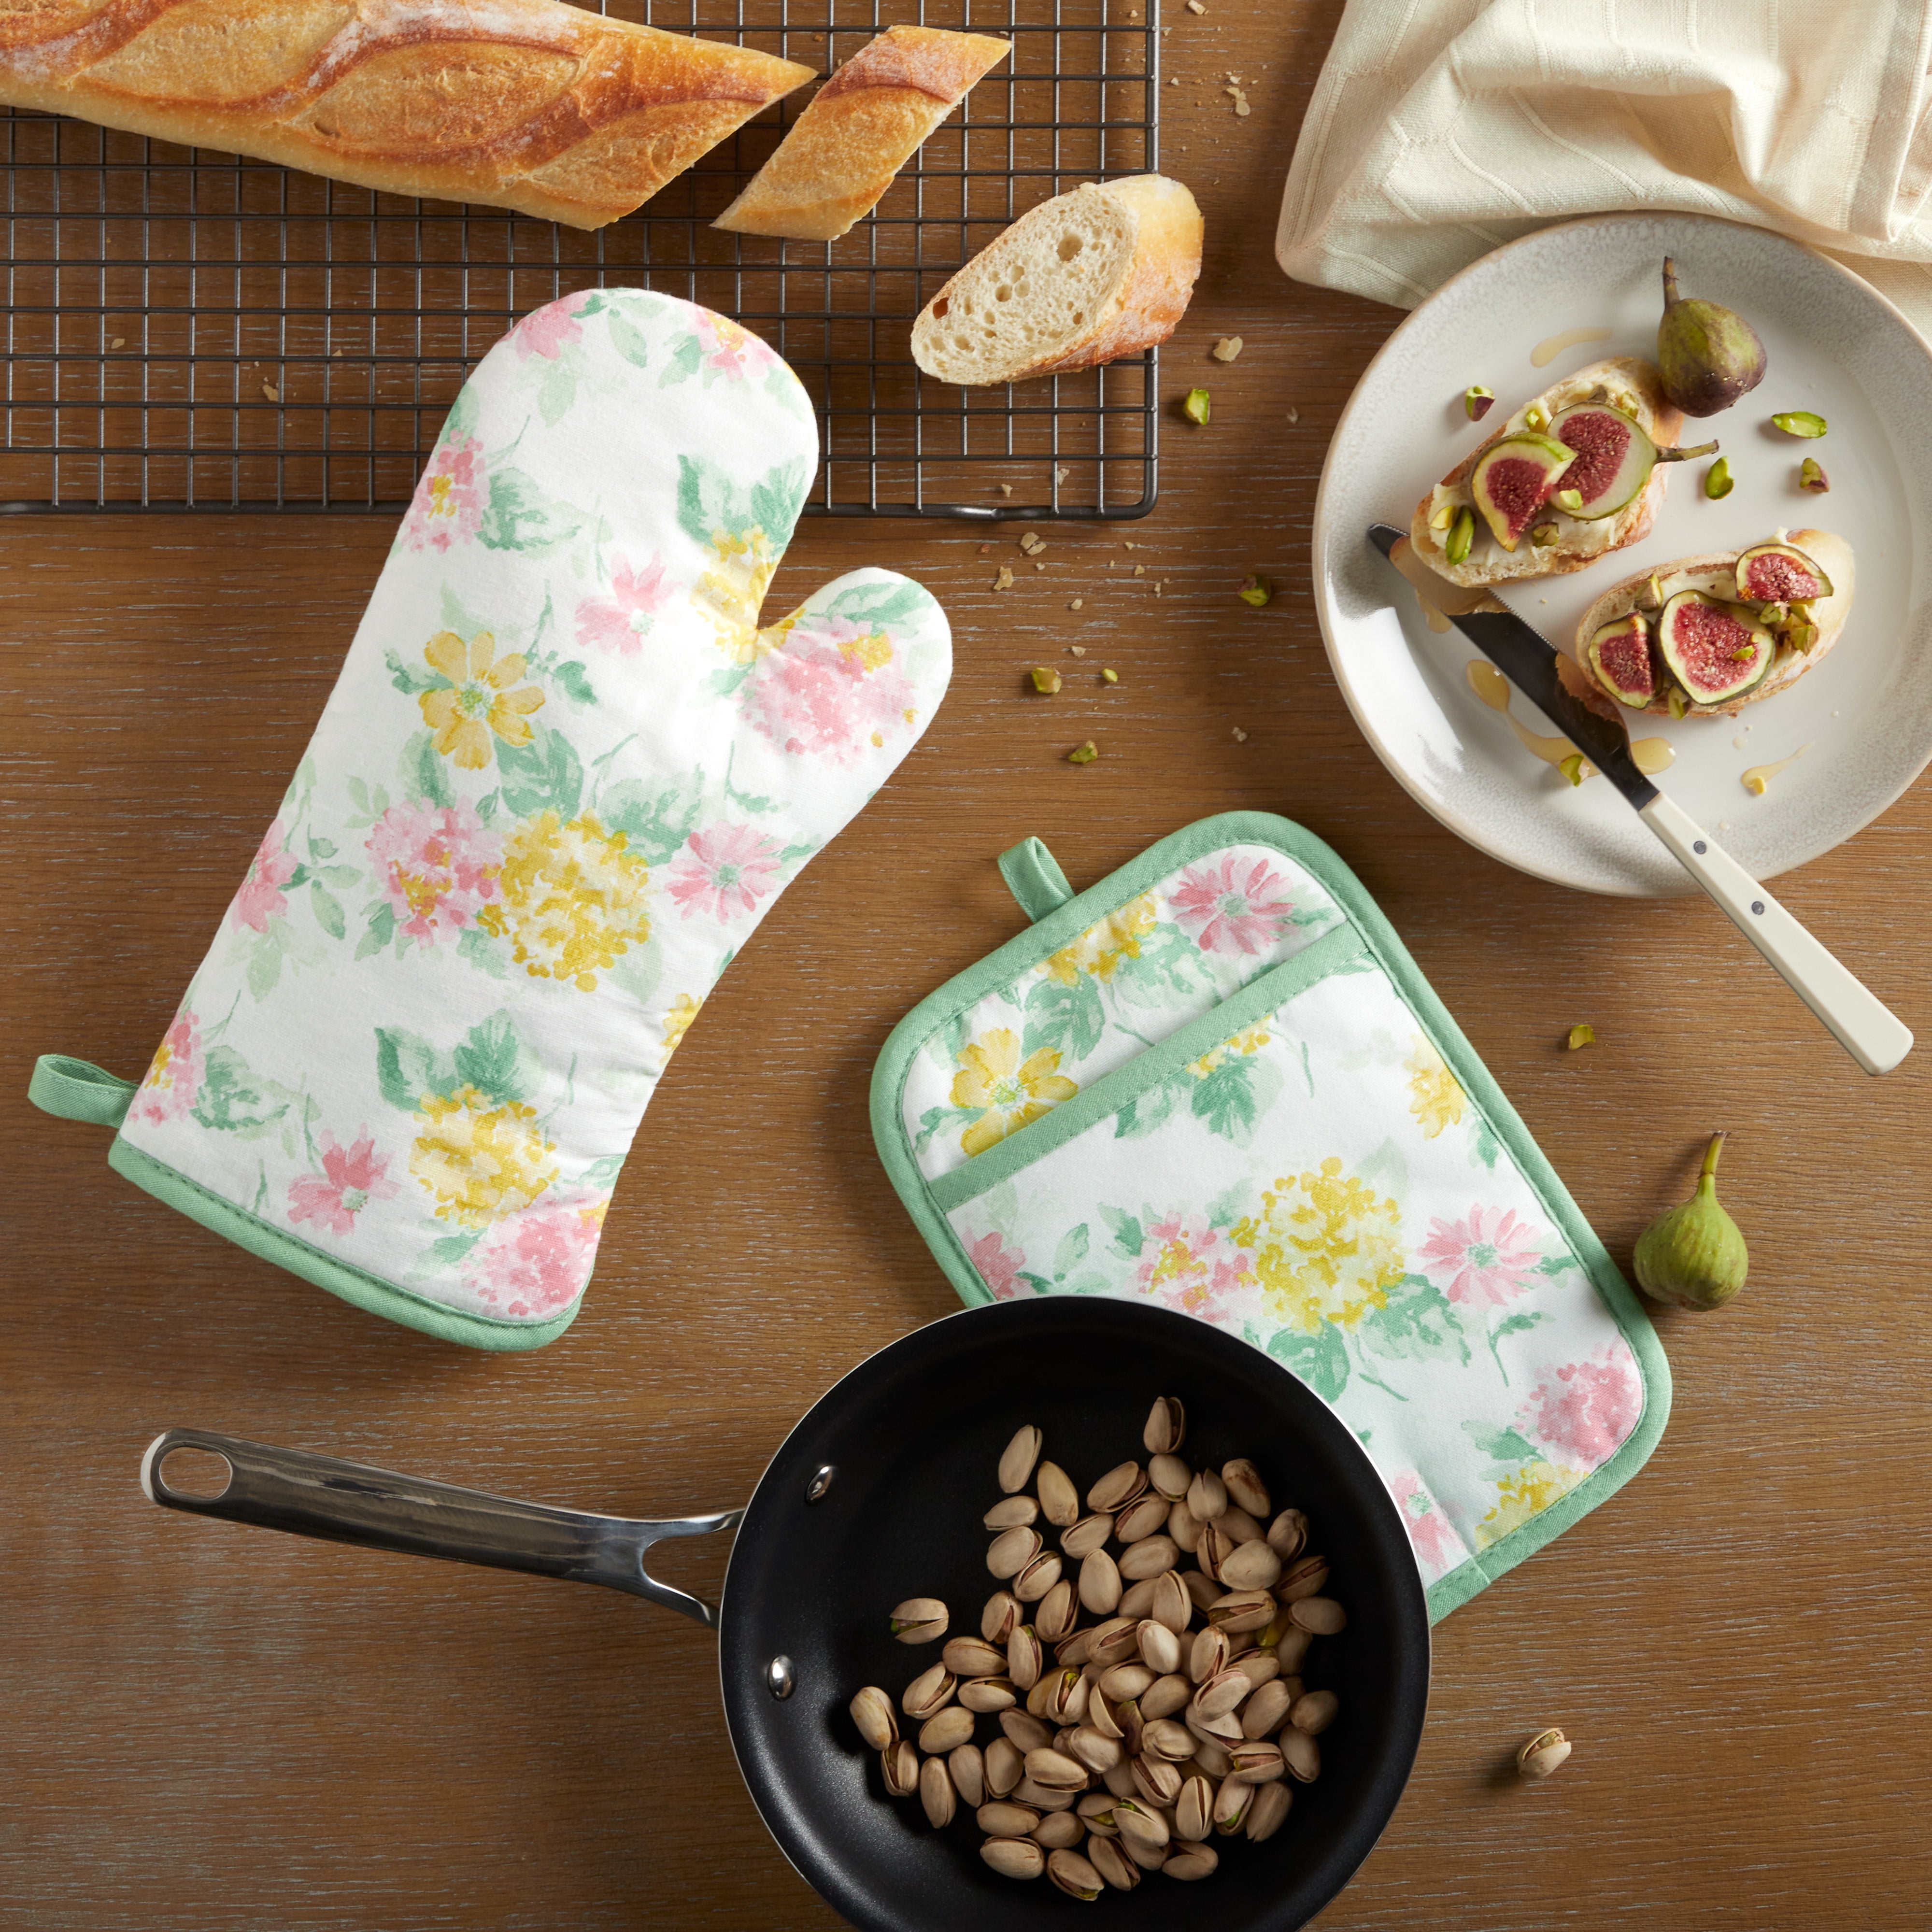 Block Print Leaves Fuchsia & White Oven Mitts and Pot Holders Set - 1 Piece of Each